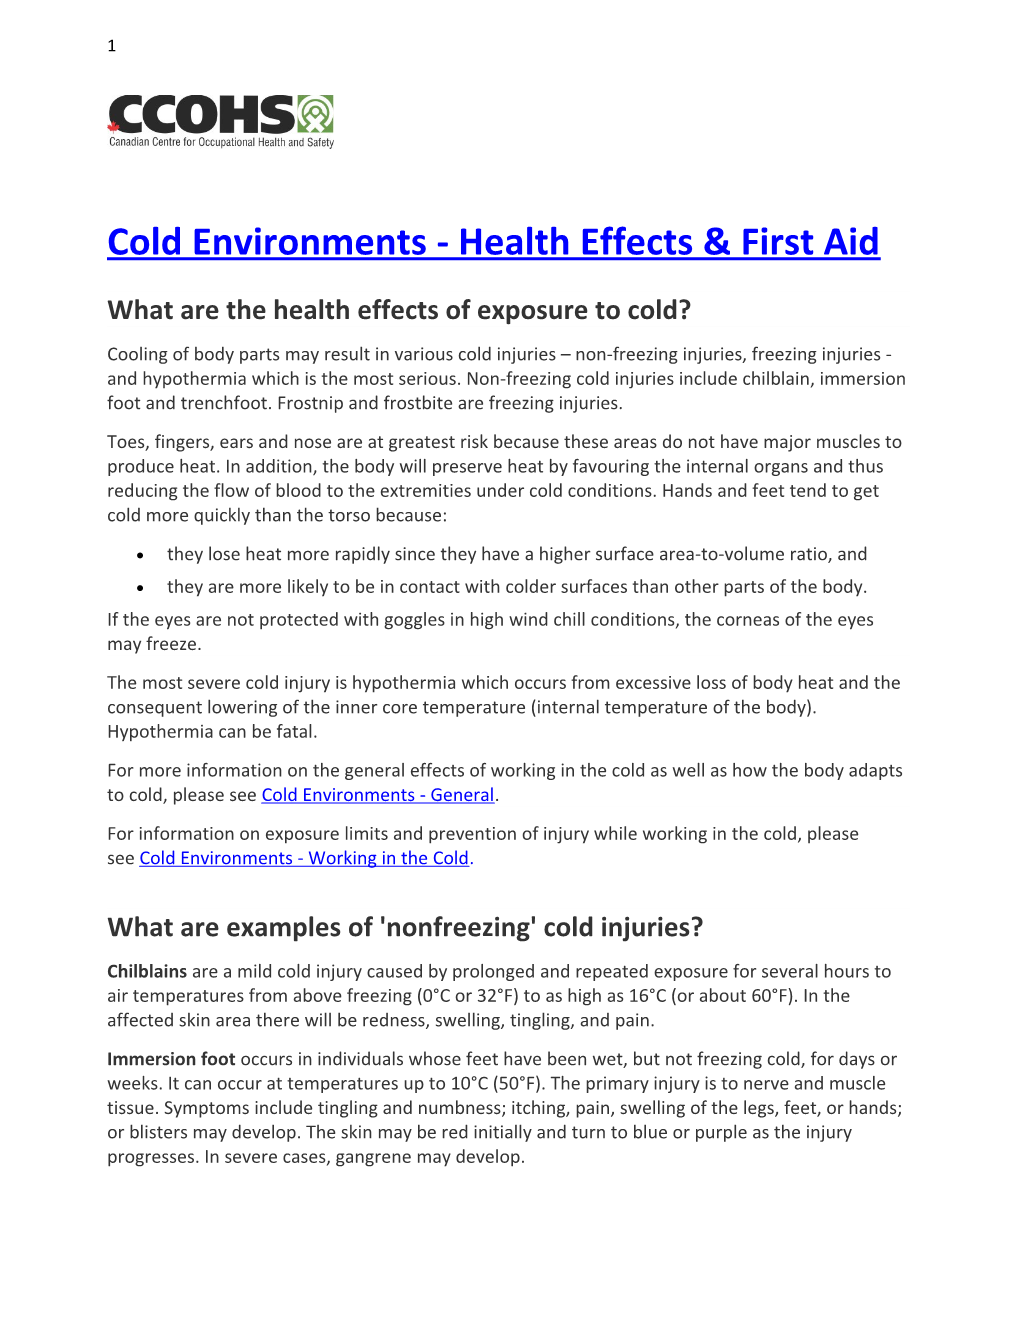 Cold Environments - Health Effects & First Aid